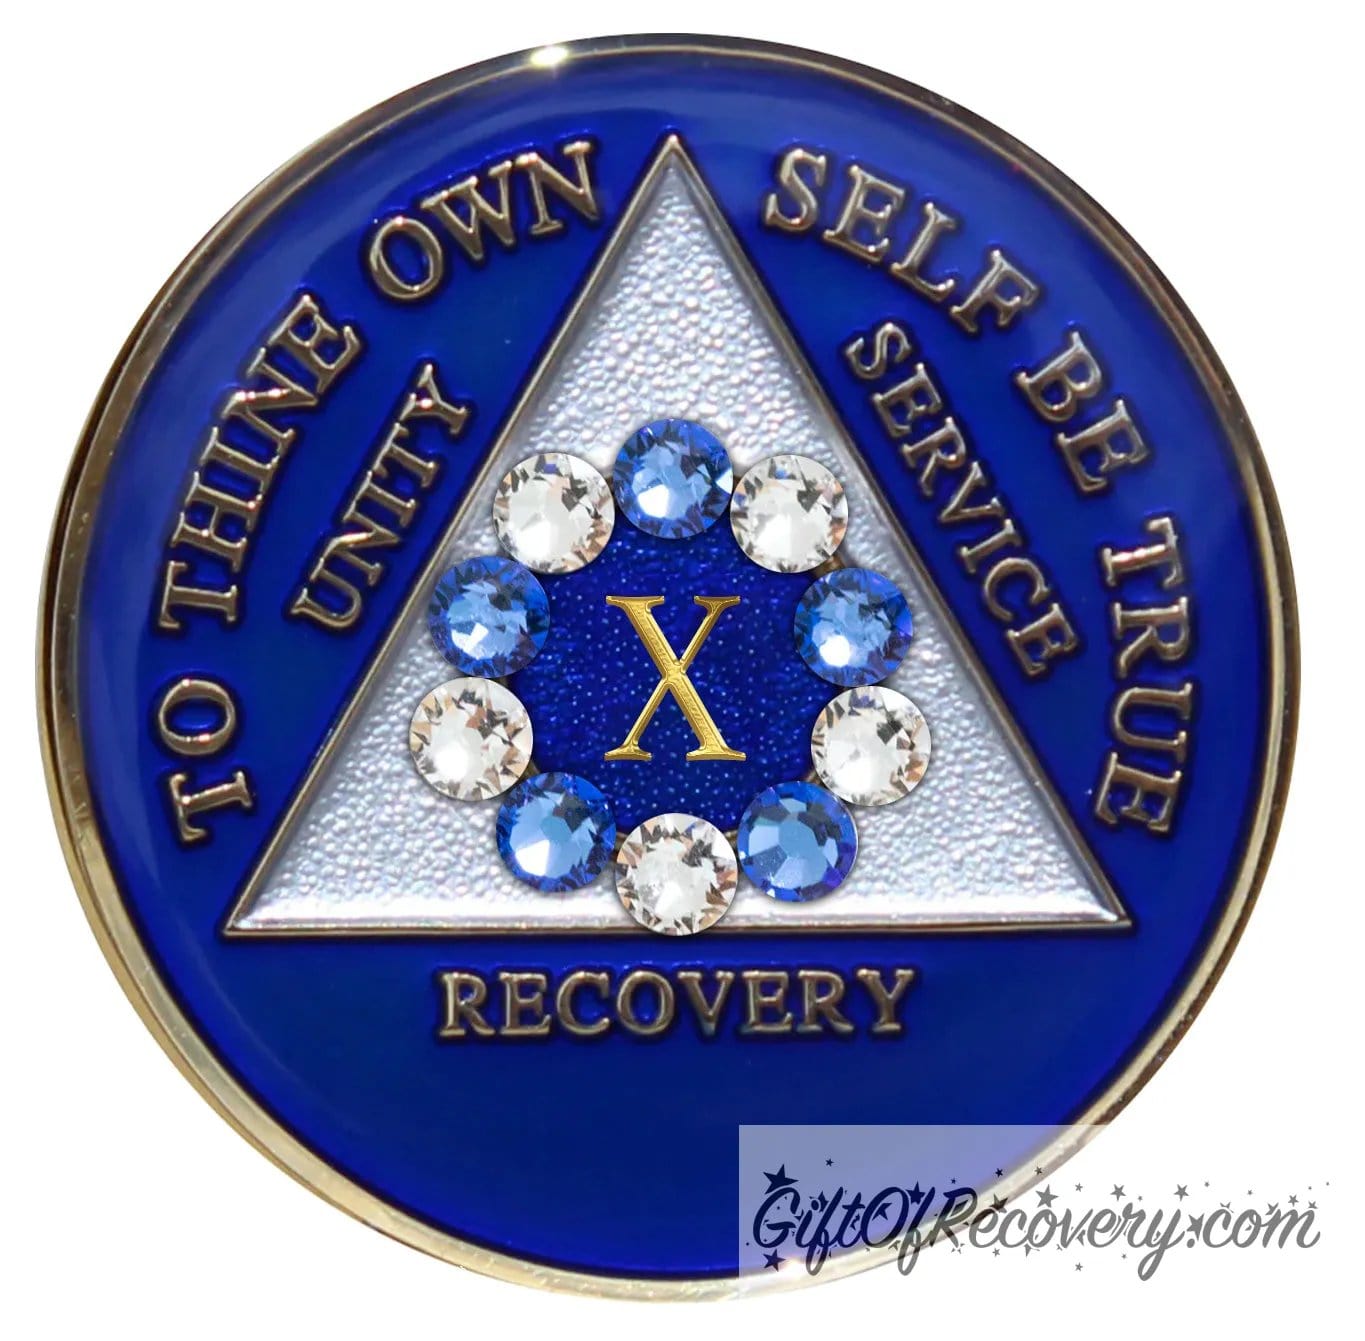 10 Year Big Book Blue AA medallion with 5 blue genuine crystals and 5 clear genuine crystal, making a circle around the 10 year, the recovery medallion has raised lettering to thine own self be true, and the outer rim of the medallion in 14k gold, inside the triangle is white and blue, emphasizing action and reflection.